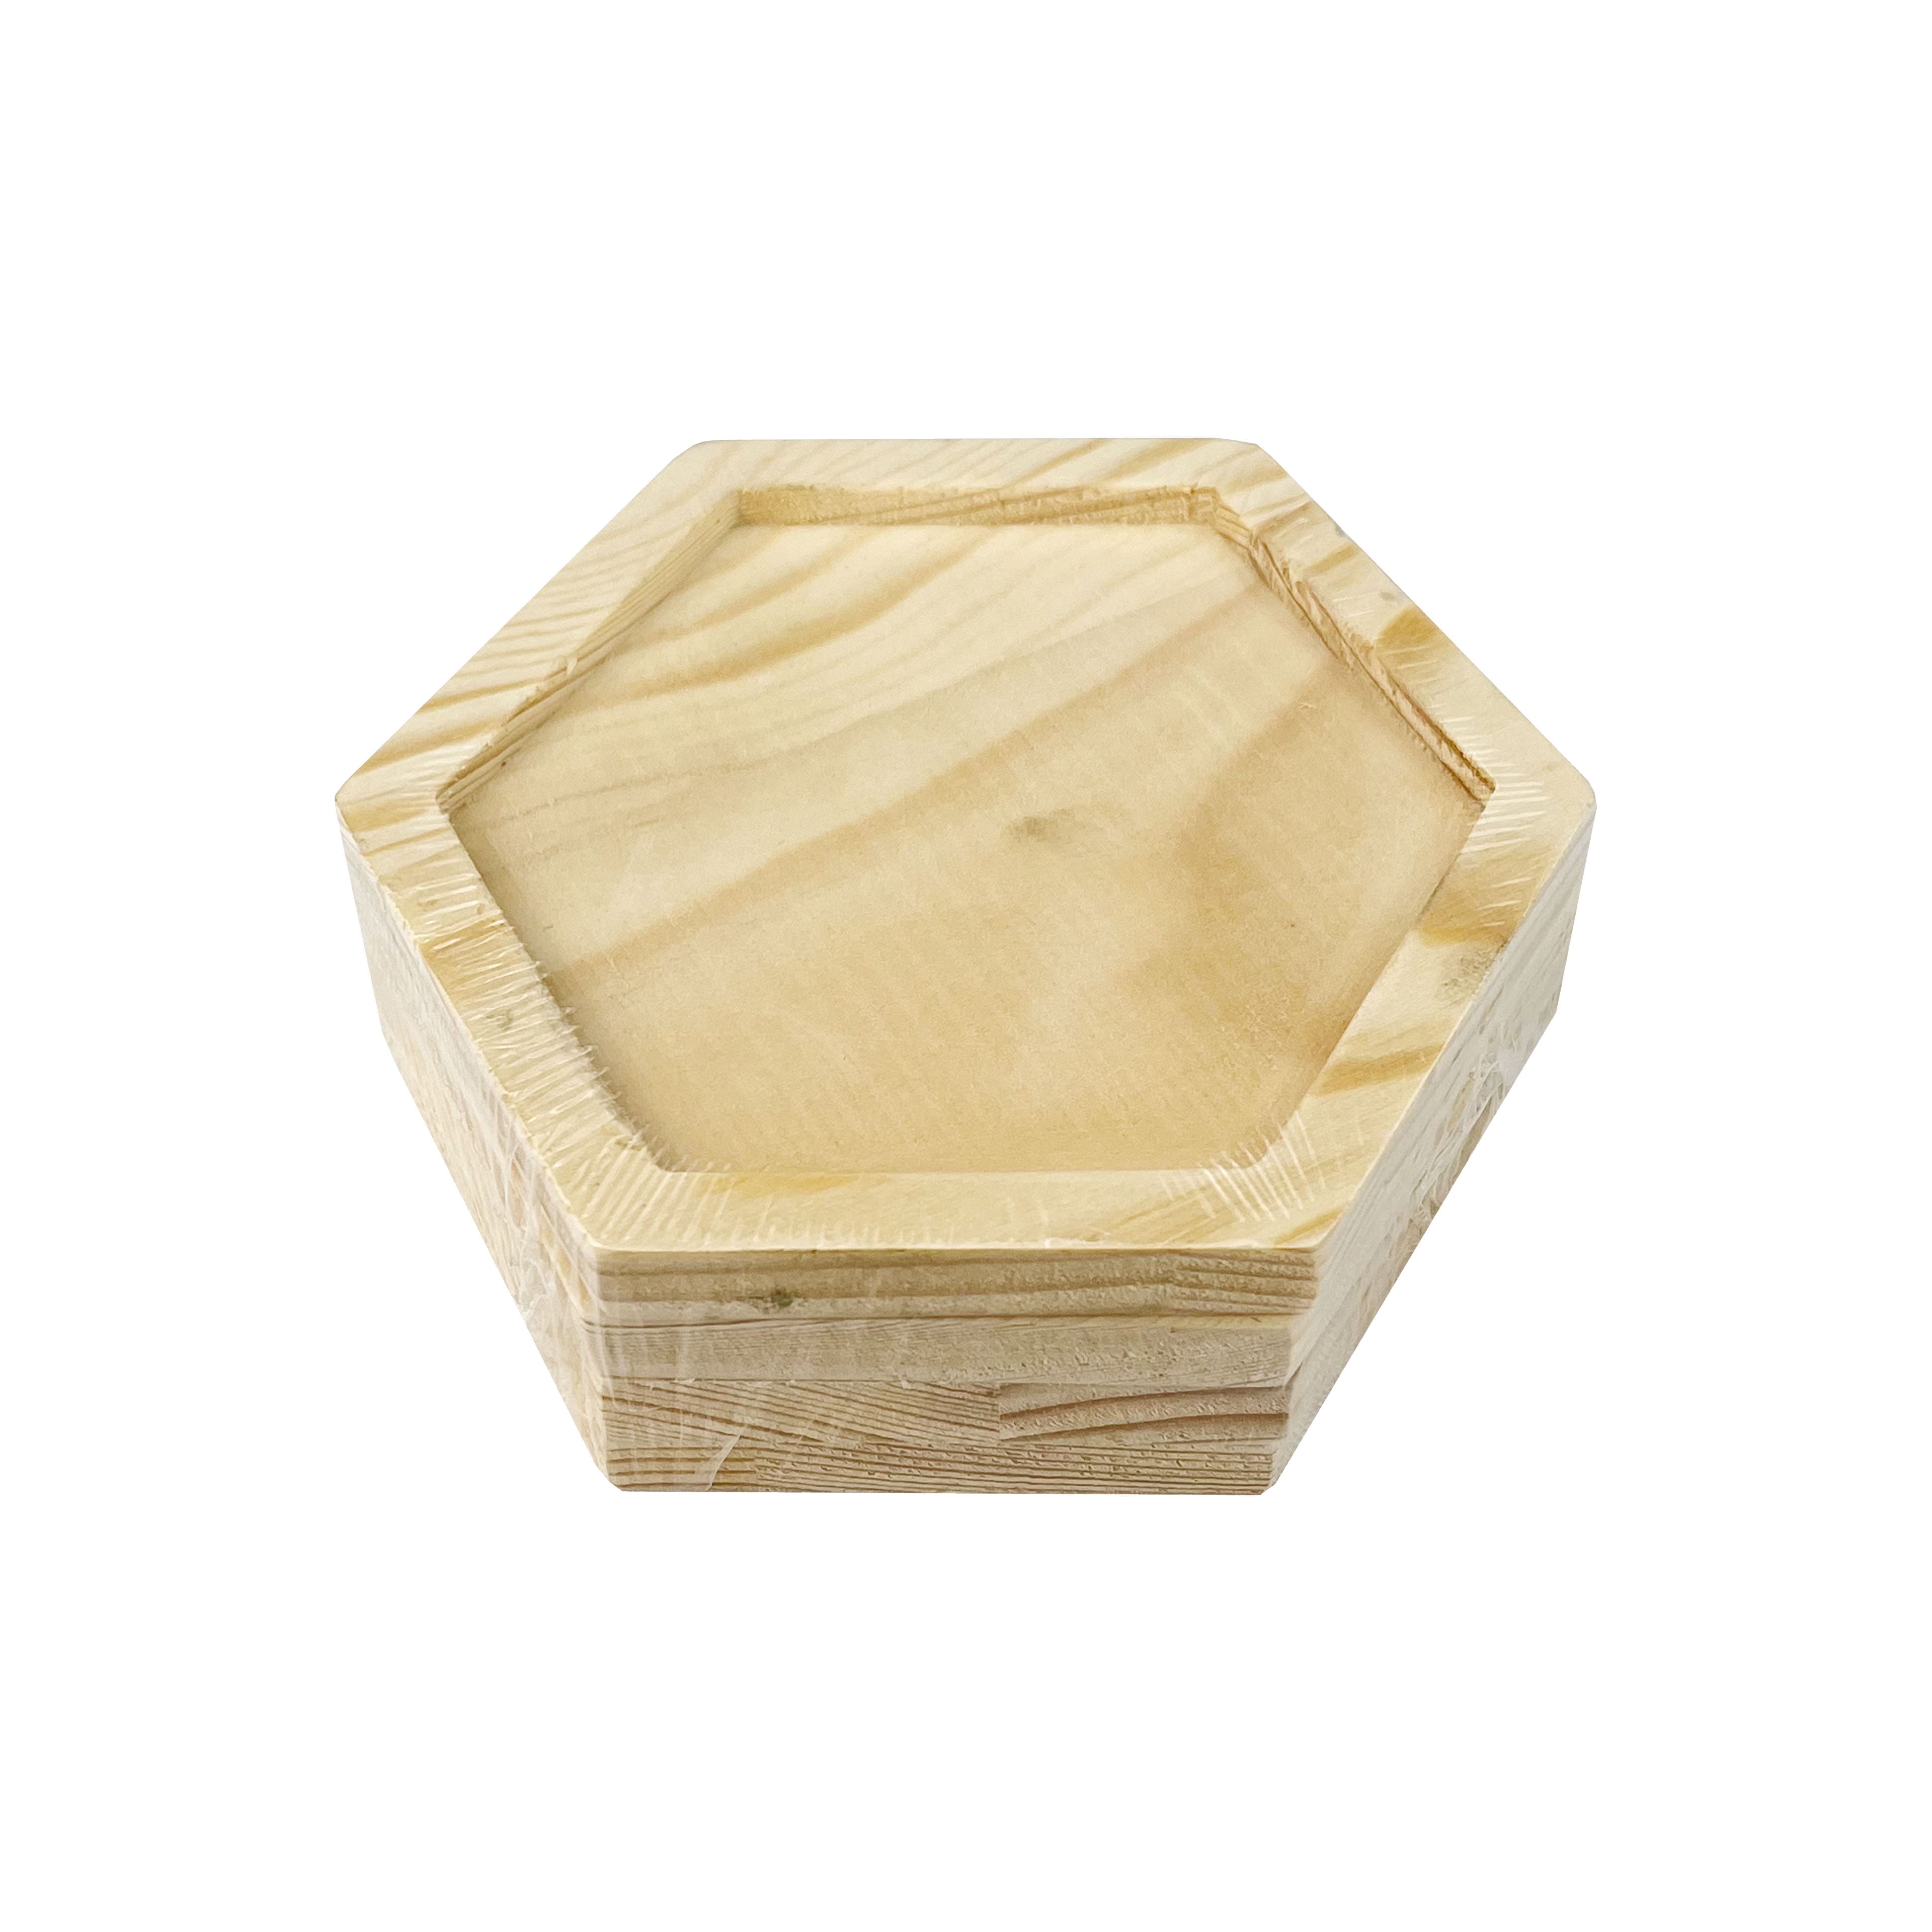 12 Packs: 4 ct. (48 total) Hexagon Welled Pinewood Coasters by Make Market&#xAE;